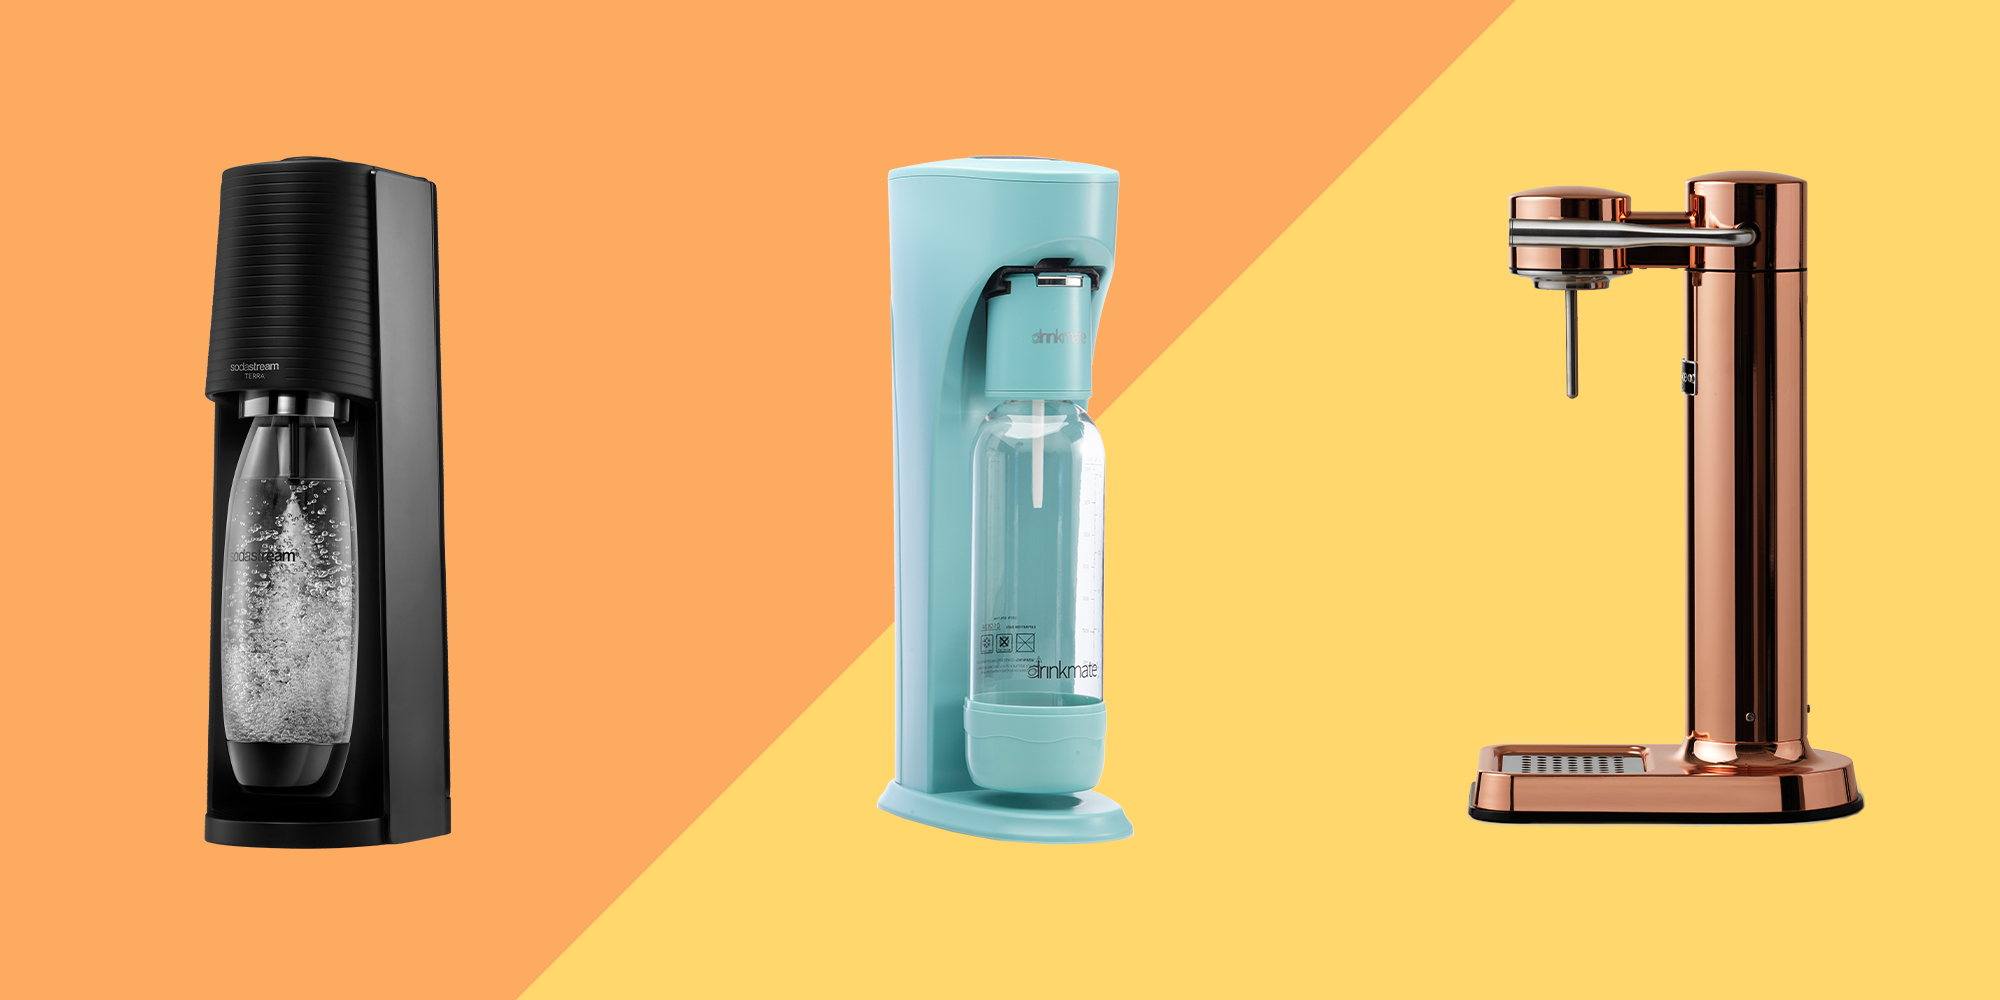 I tried Sodastream rivals to find the best soda maker - my